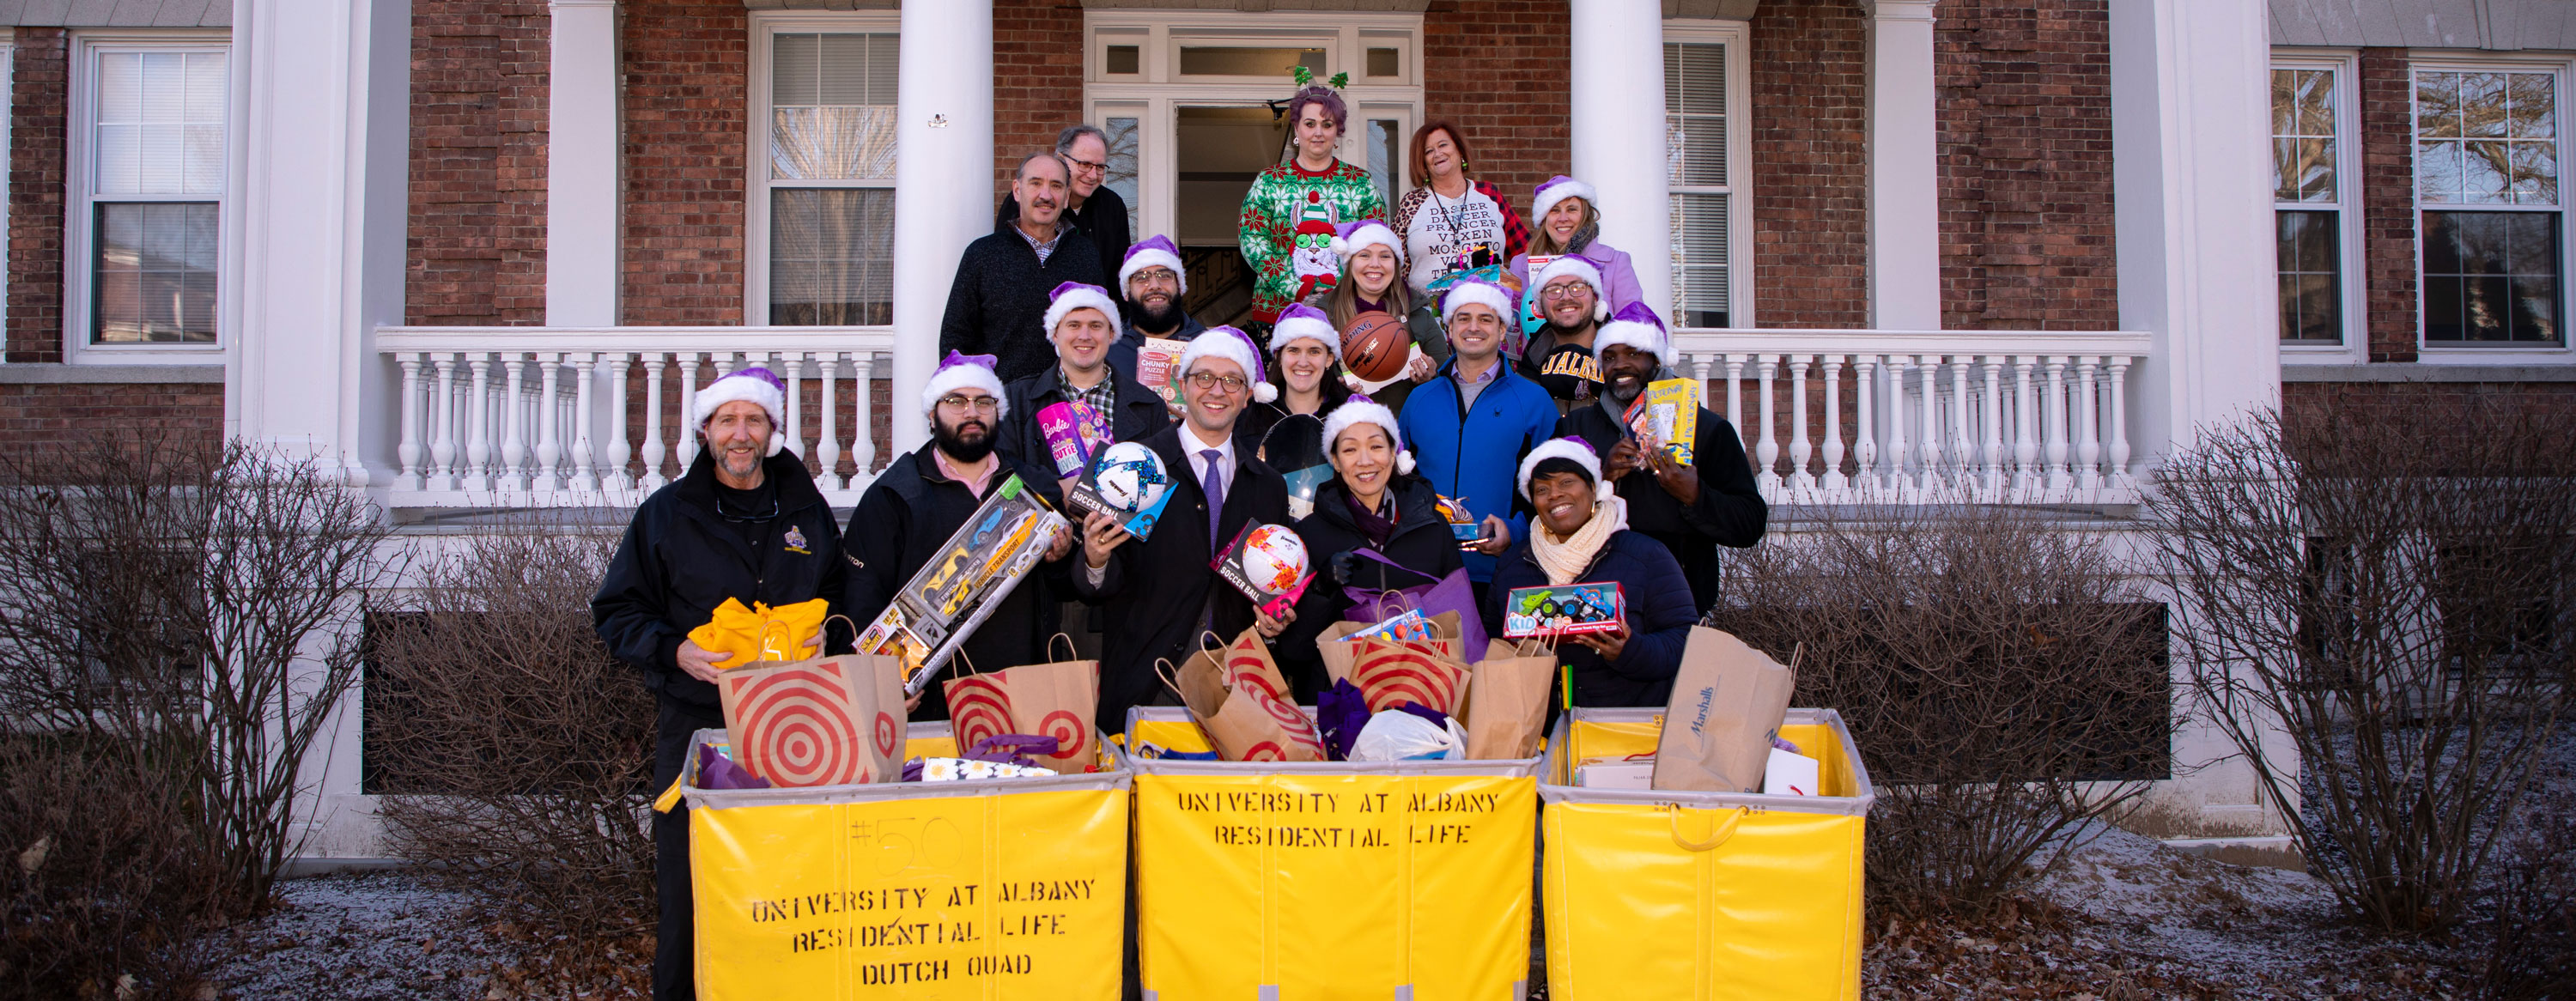 Seventeen UAlbany employees wearing purple Santa hats smile and pose with three carts full of holiday gifts.